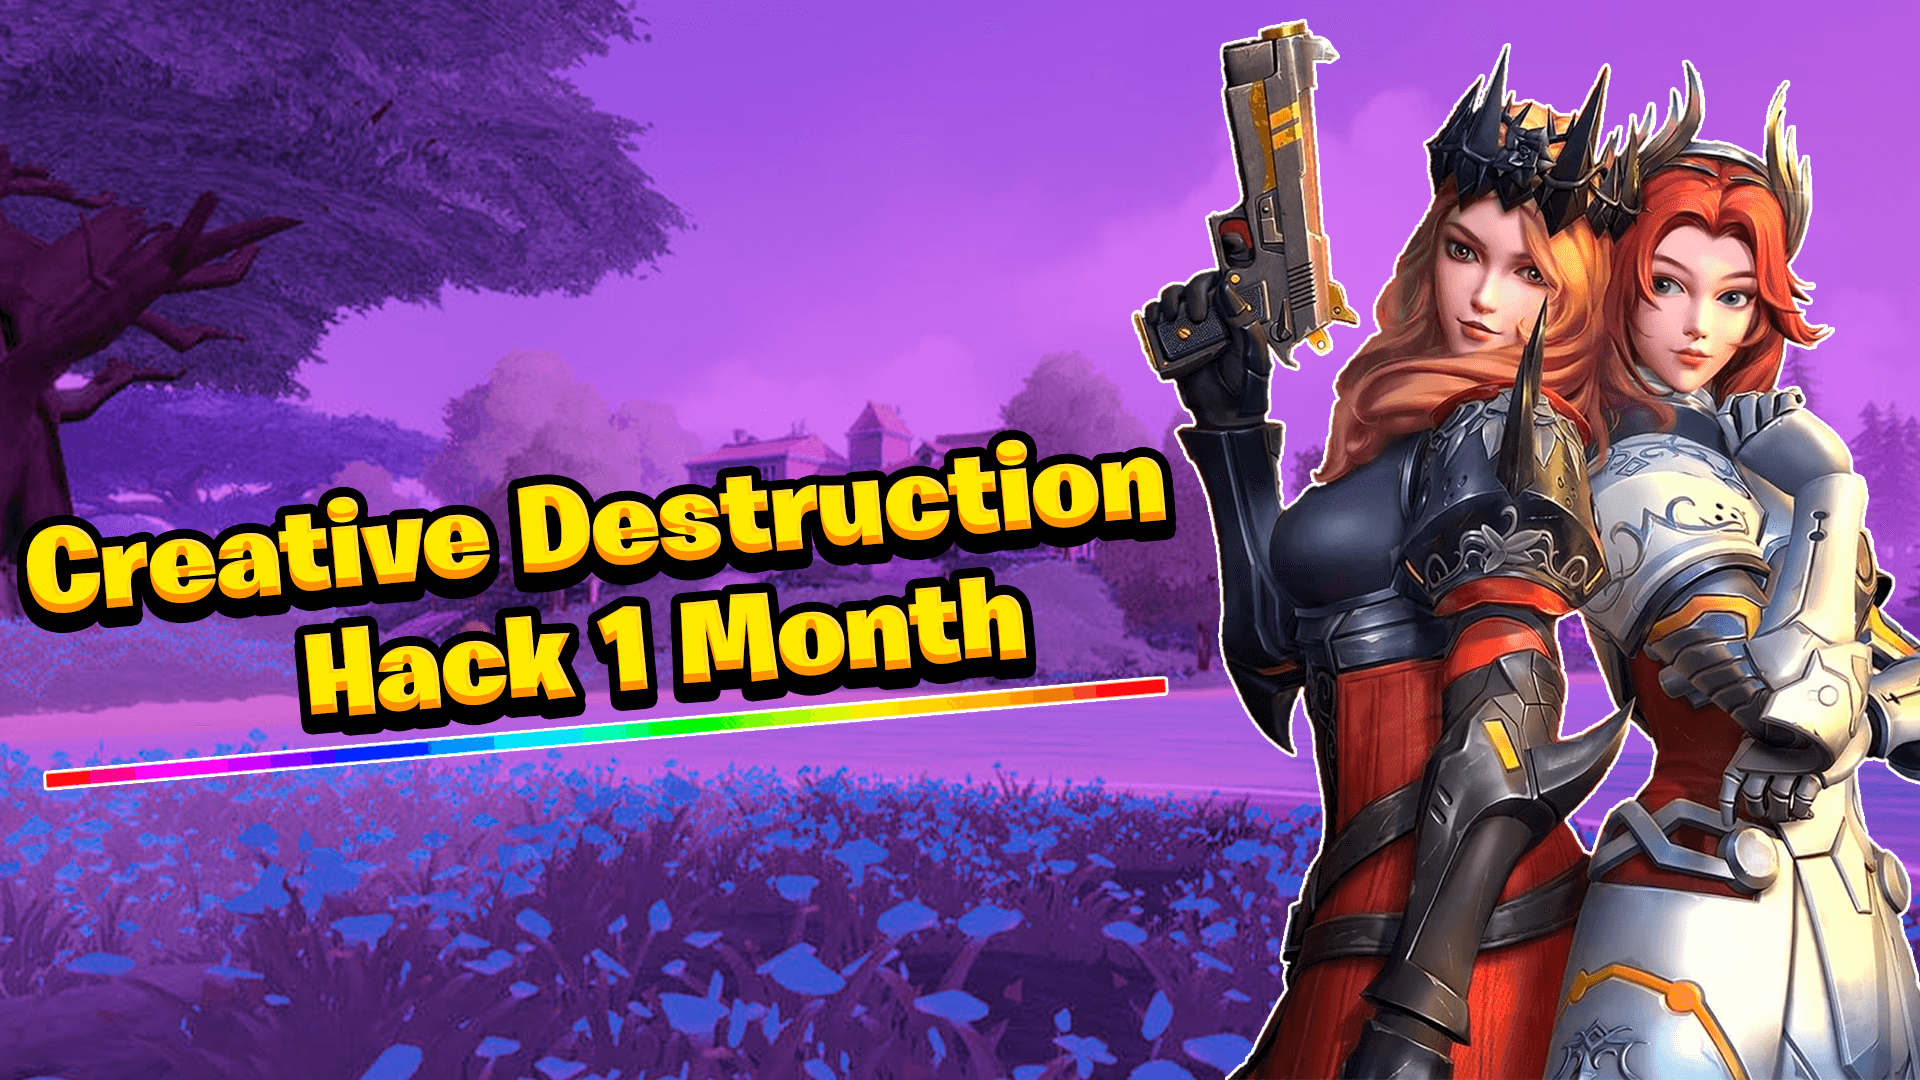 More information about "Shadow - Creative Destruction 1 Month"